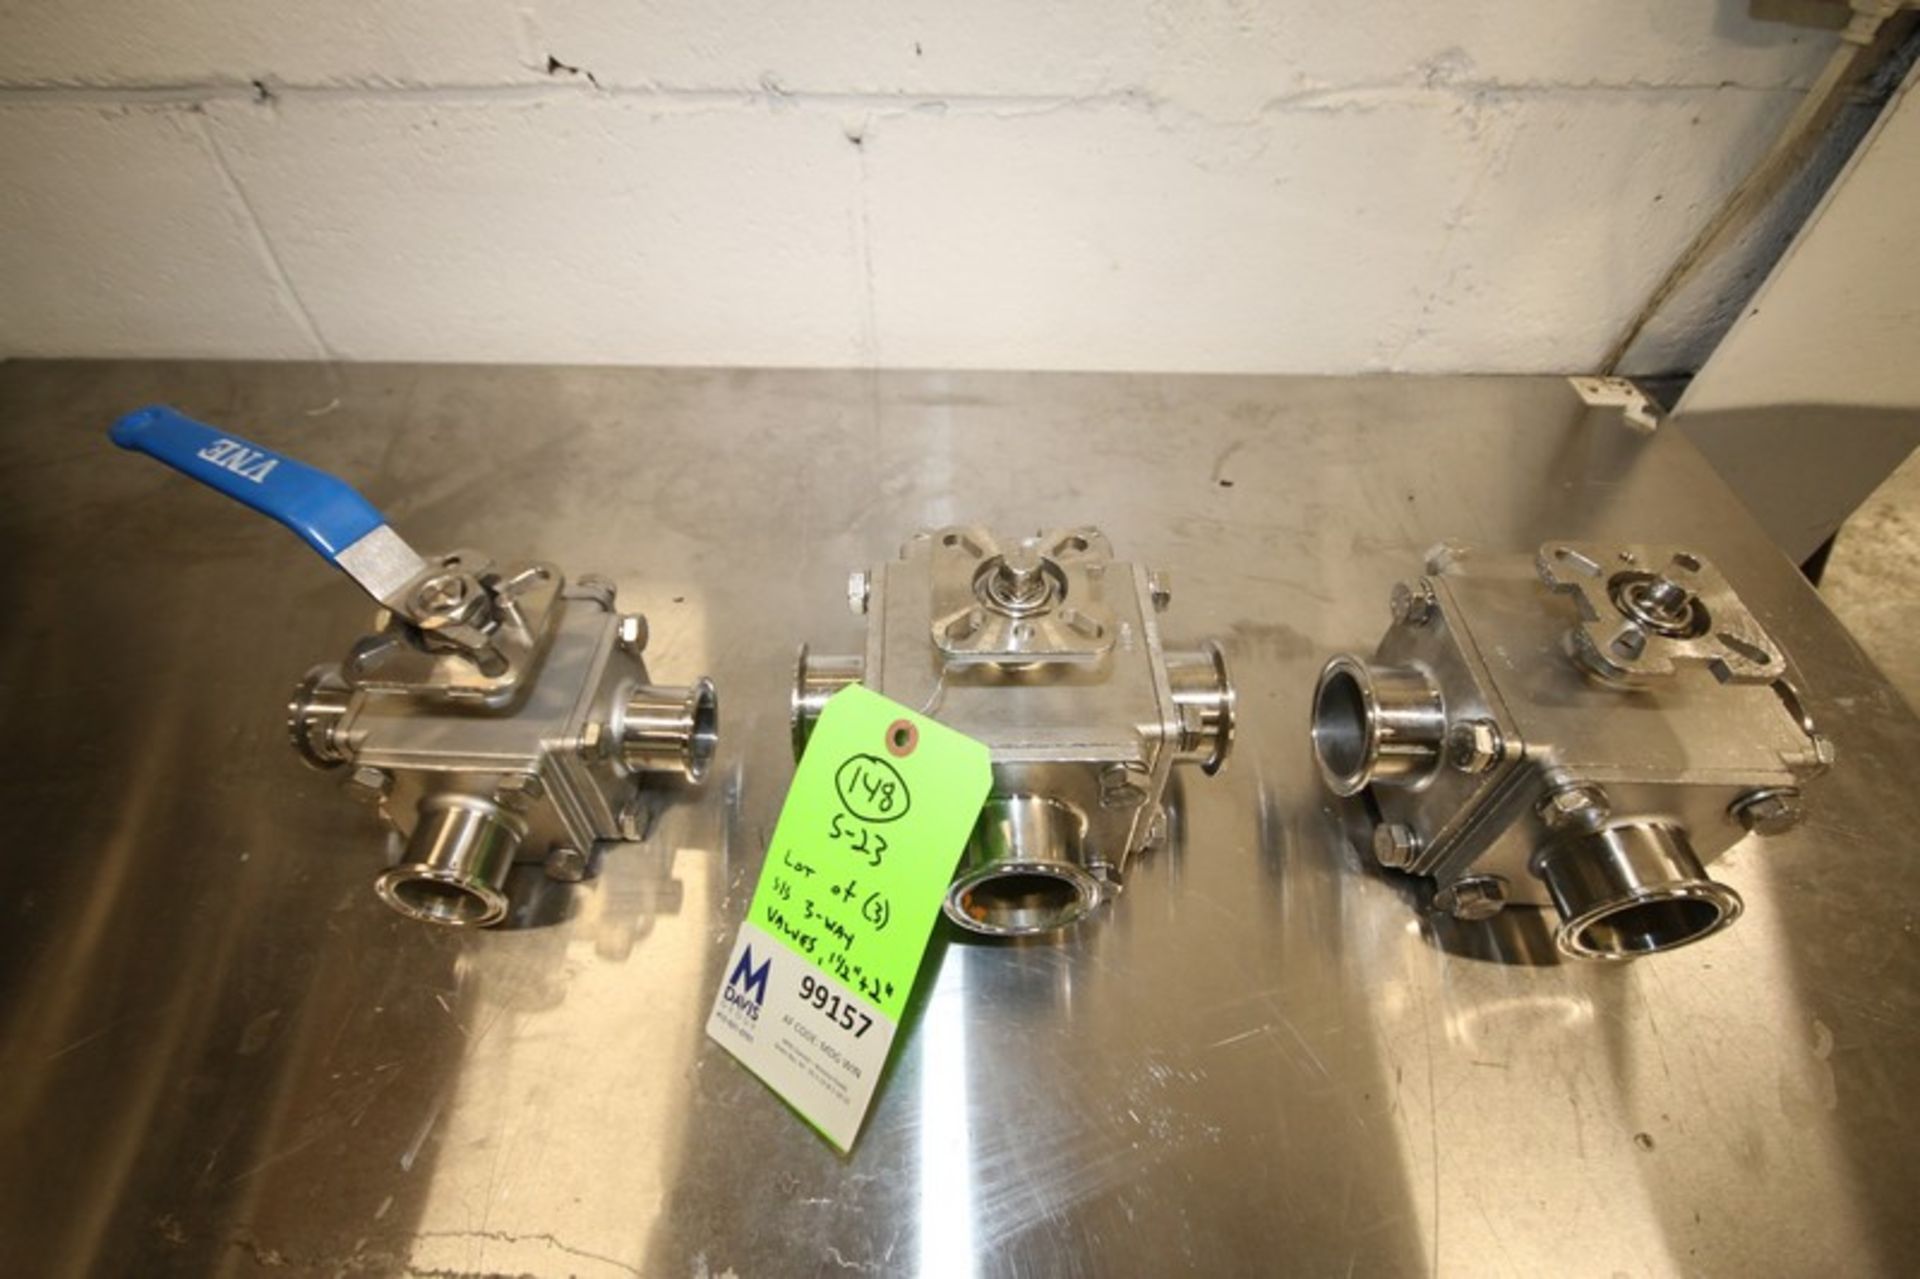 Lot of (3) 1.5" & 2" 3 - Way Clamp Type S/S Plug Valves, (Note: Missing (2) Handles) (INV#99157) (